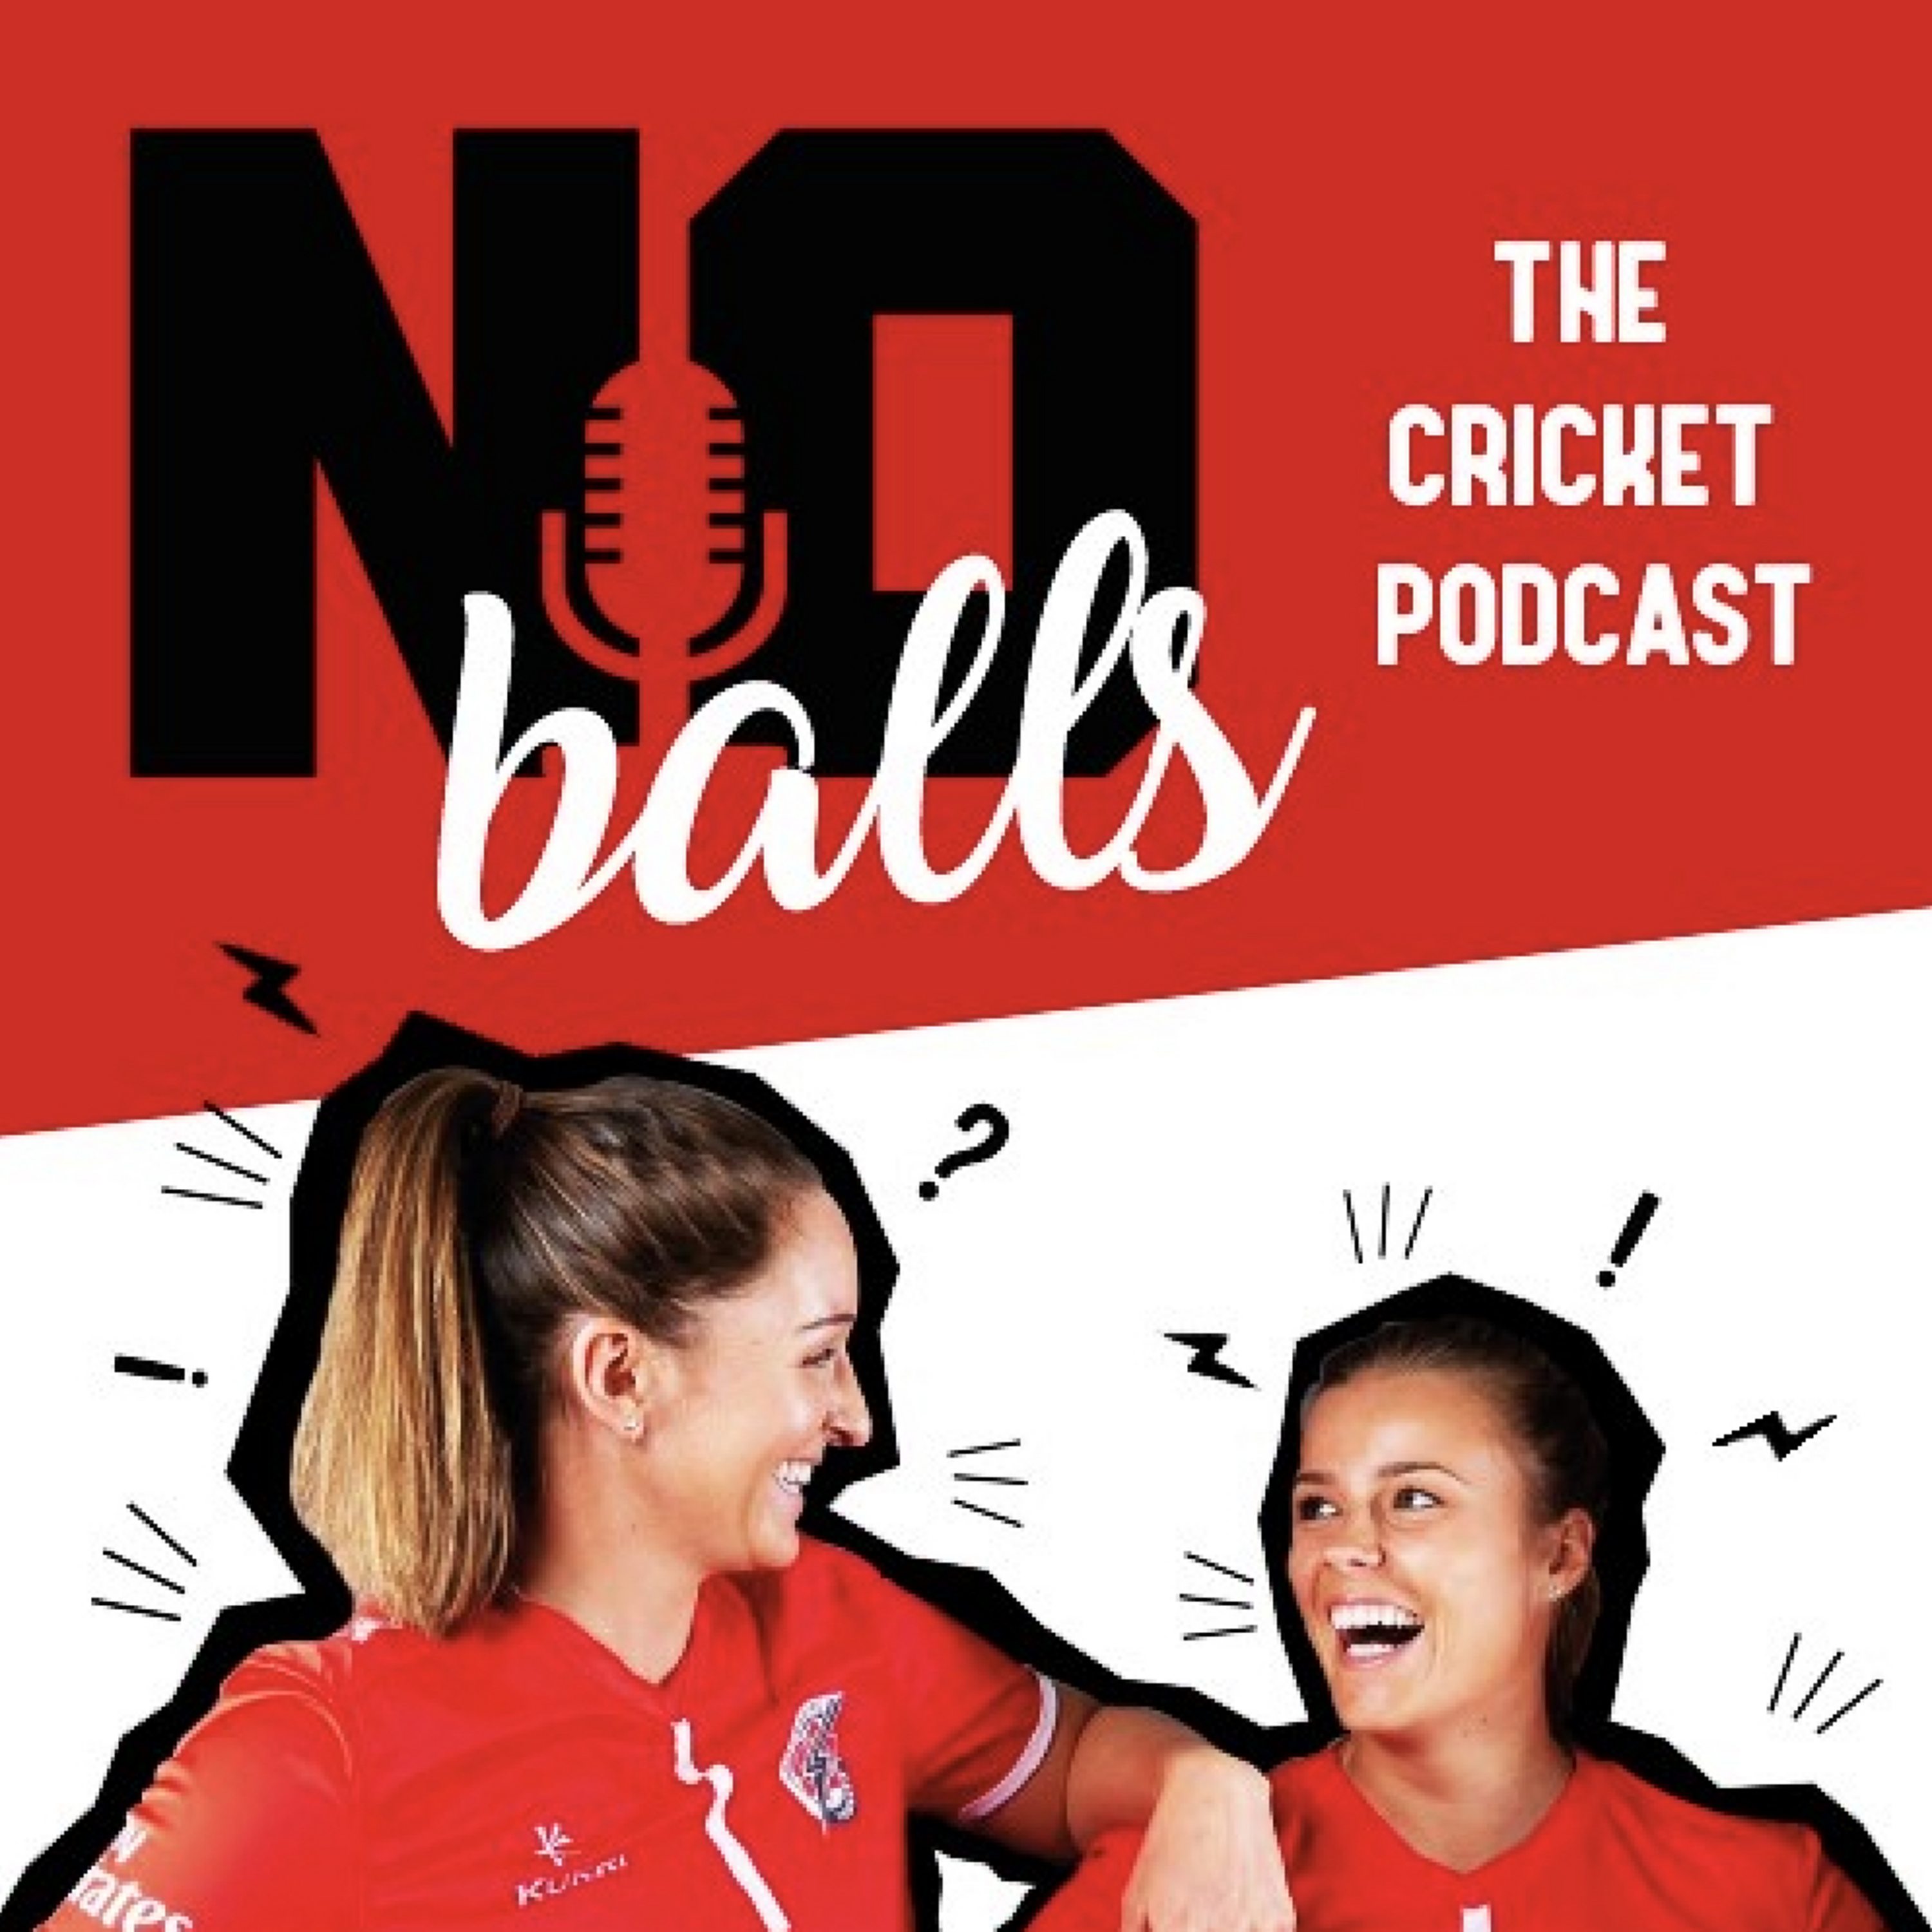 No Balls: The Cricket Podcast - World Cup wins and WPL auction drama